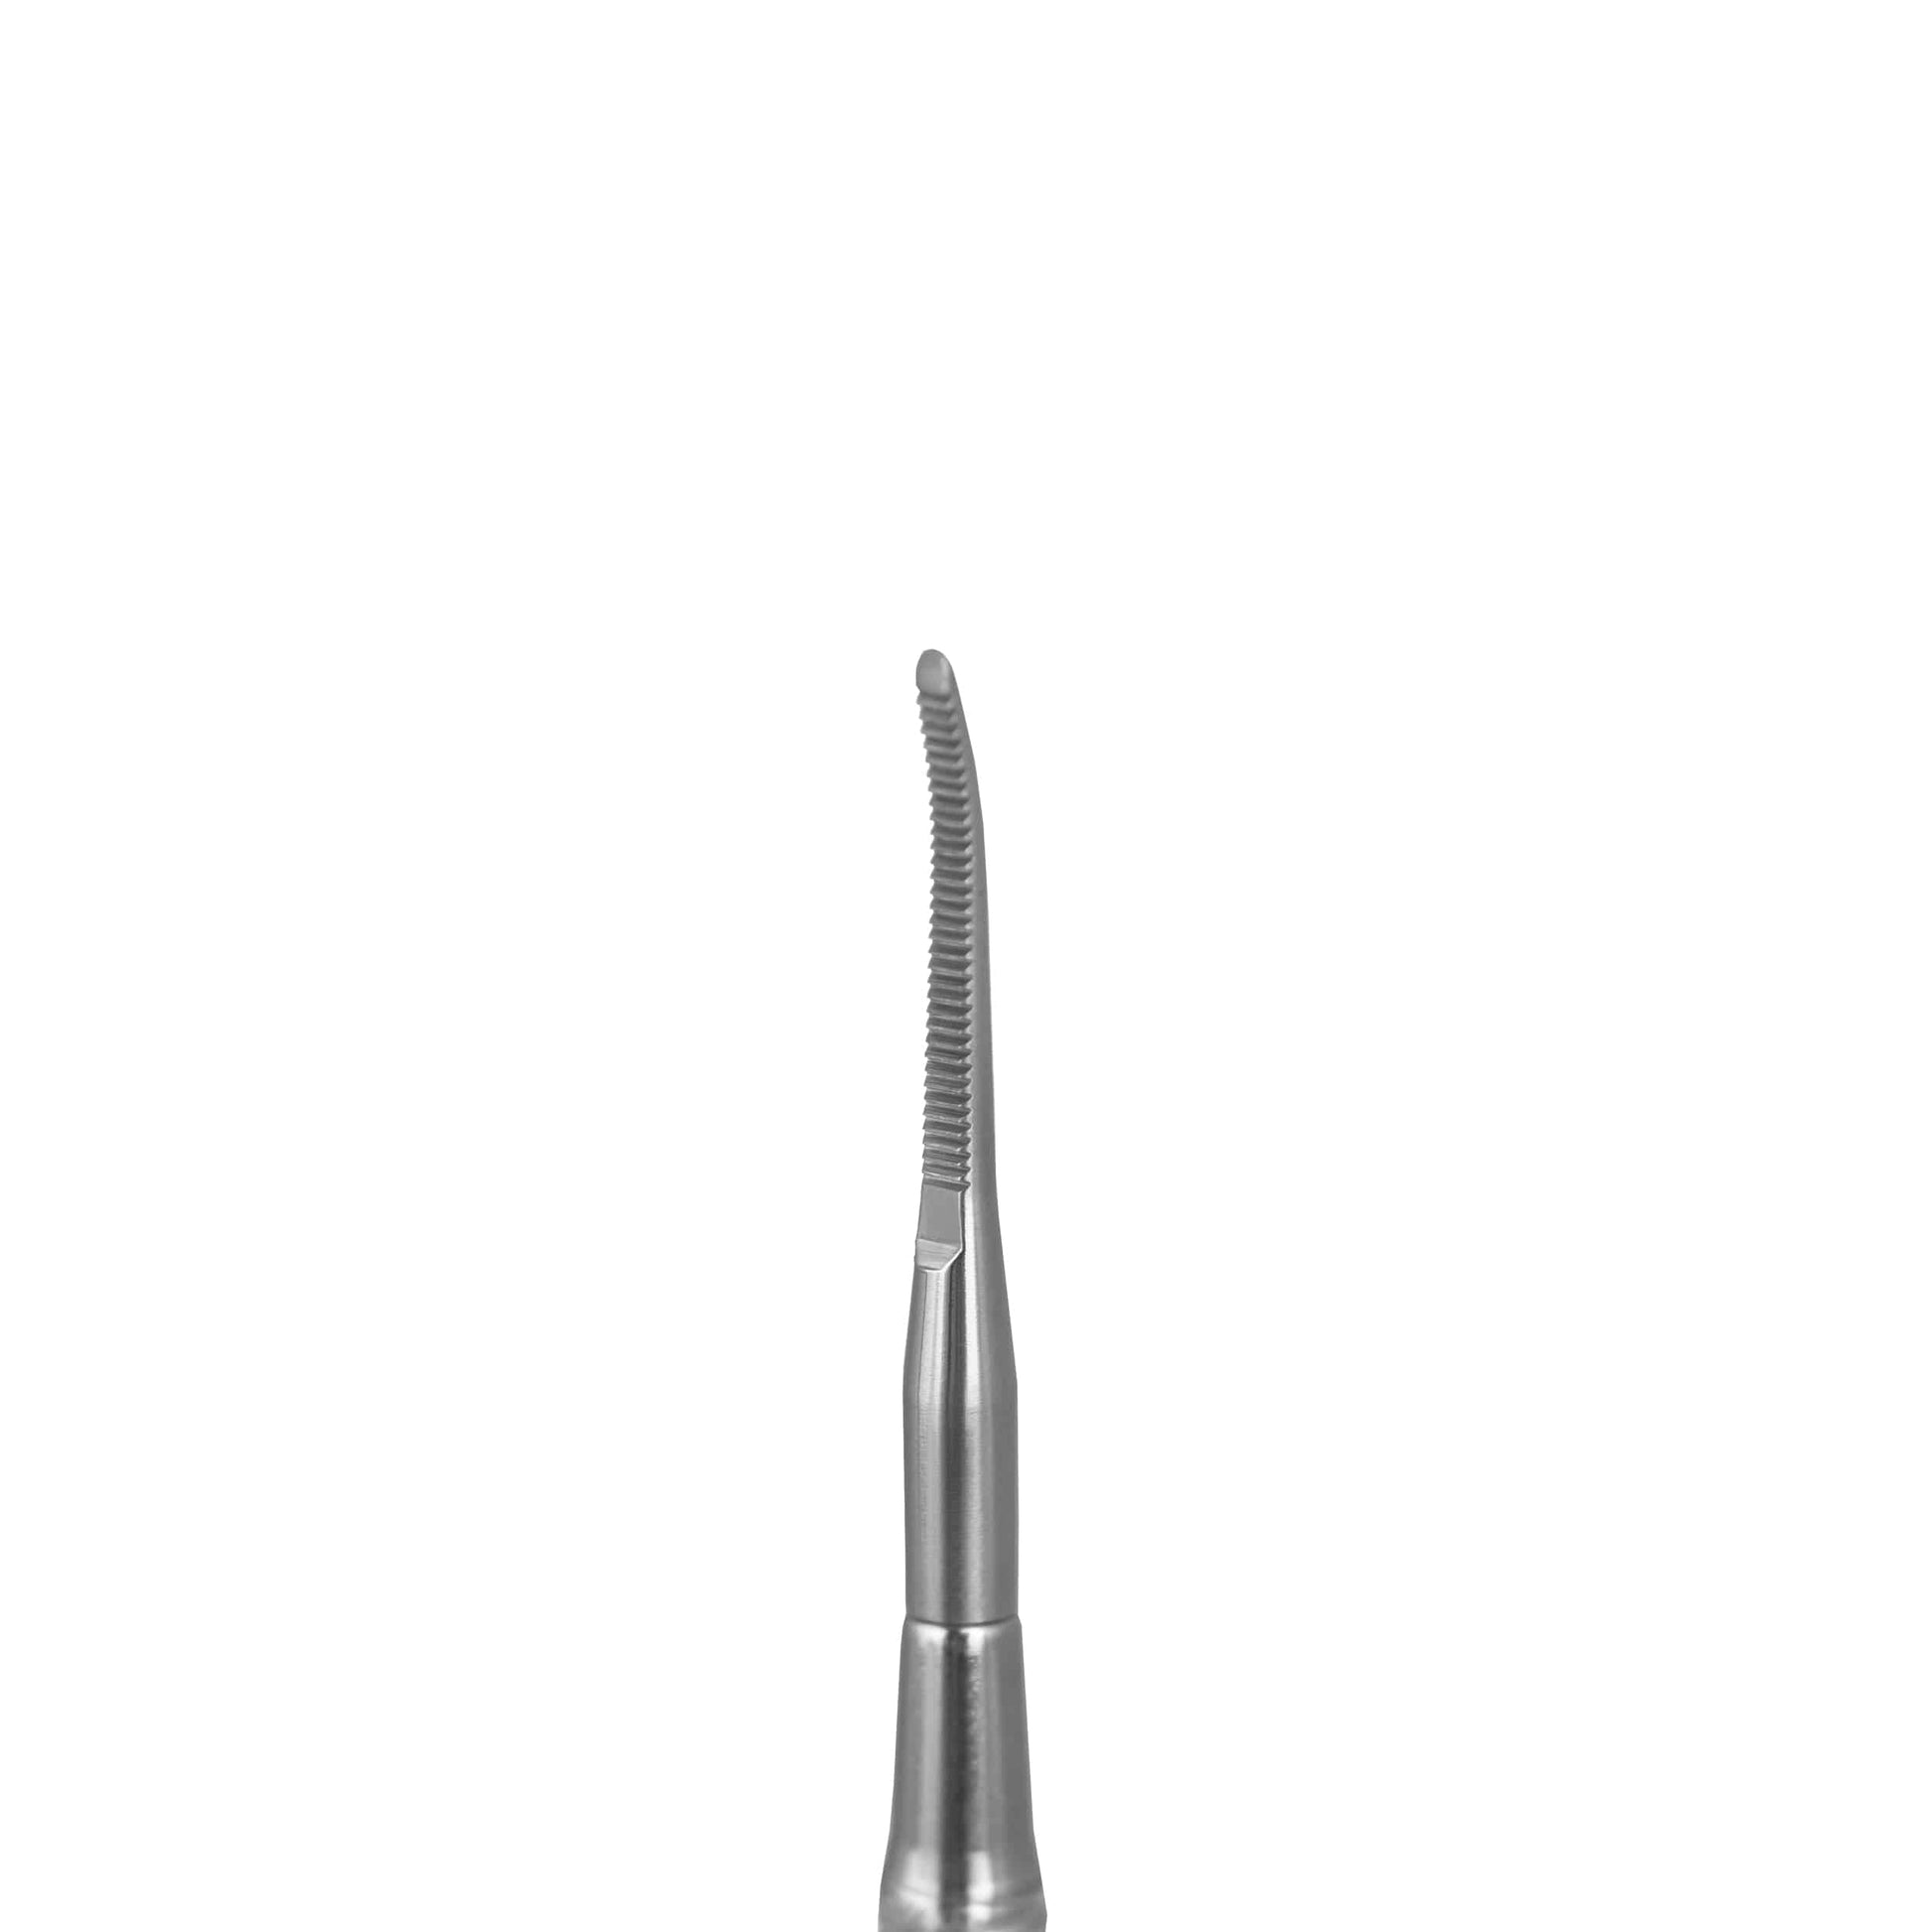 Staleks Pedicure pusher tool EXPERT 60 TYPE 3 and 4 (straight nail file and file with a bent end) - F.O.X Nails USA